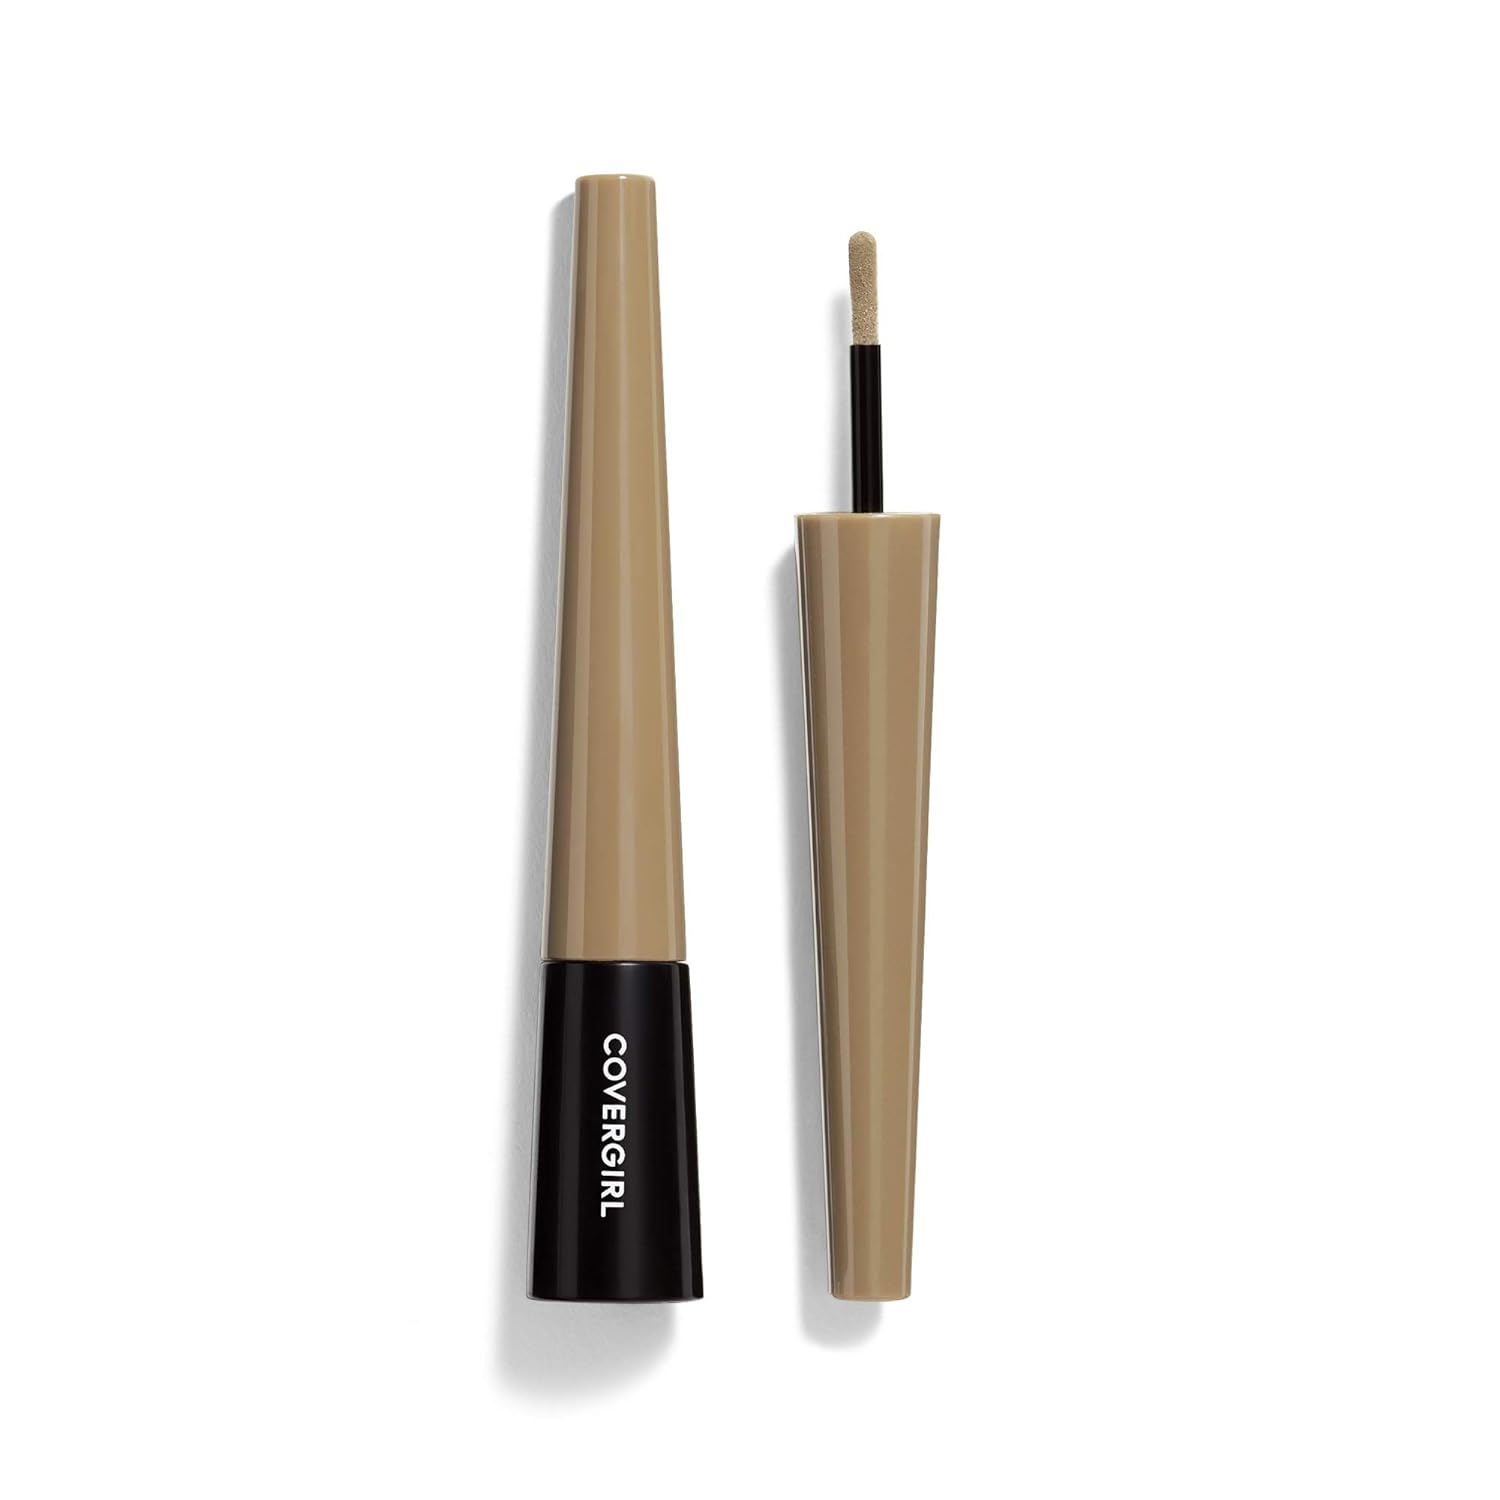 COVERGIRL Easy Breezy Brow Fill Plus Shape Plus Define Powder Eyebrow Makeup, Soft Blonde, 0.024  (packaging may vary)